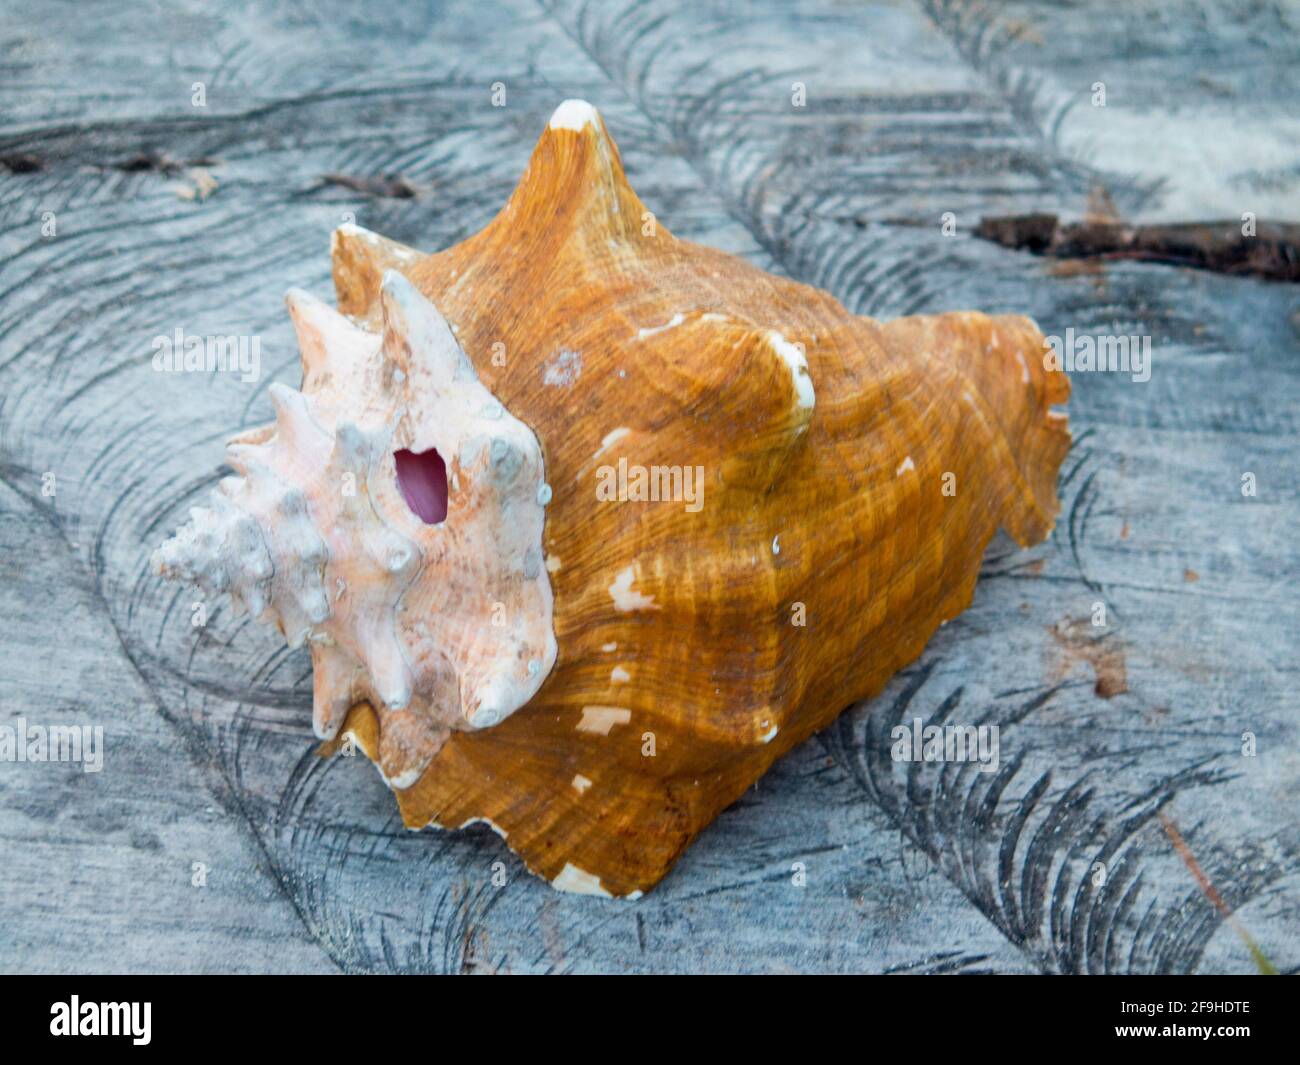 Conch shell Stock Photo